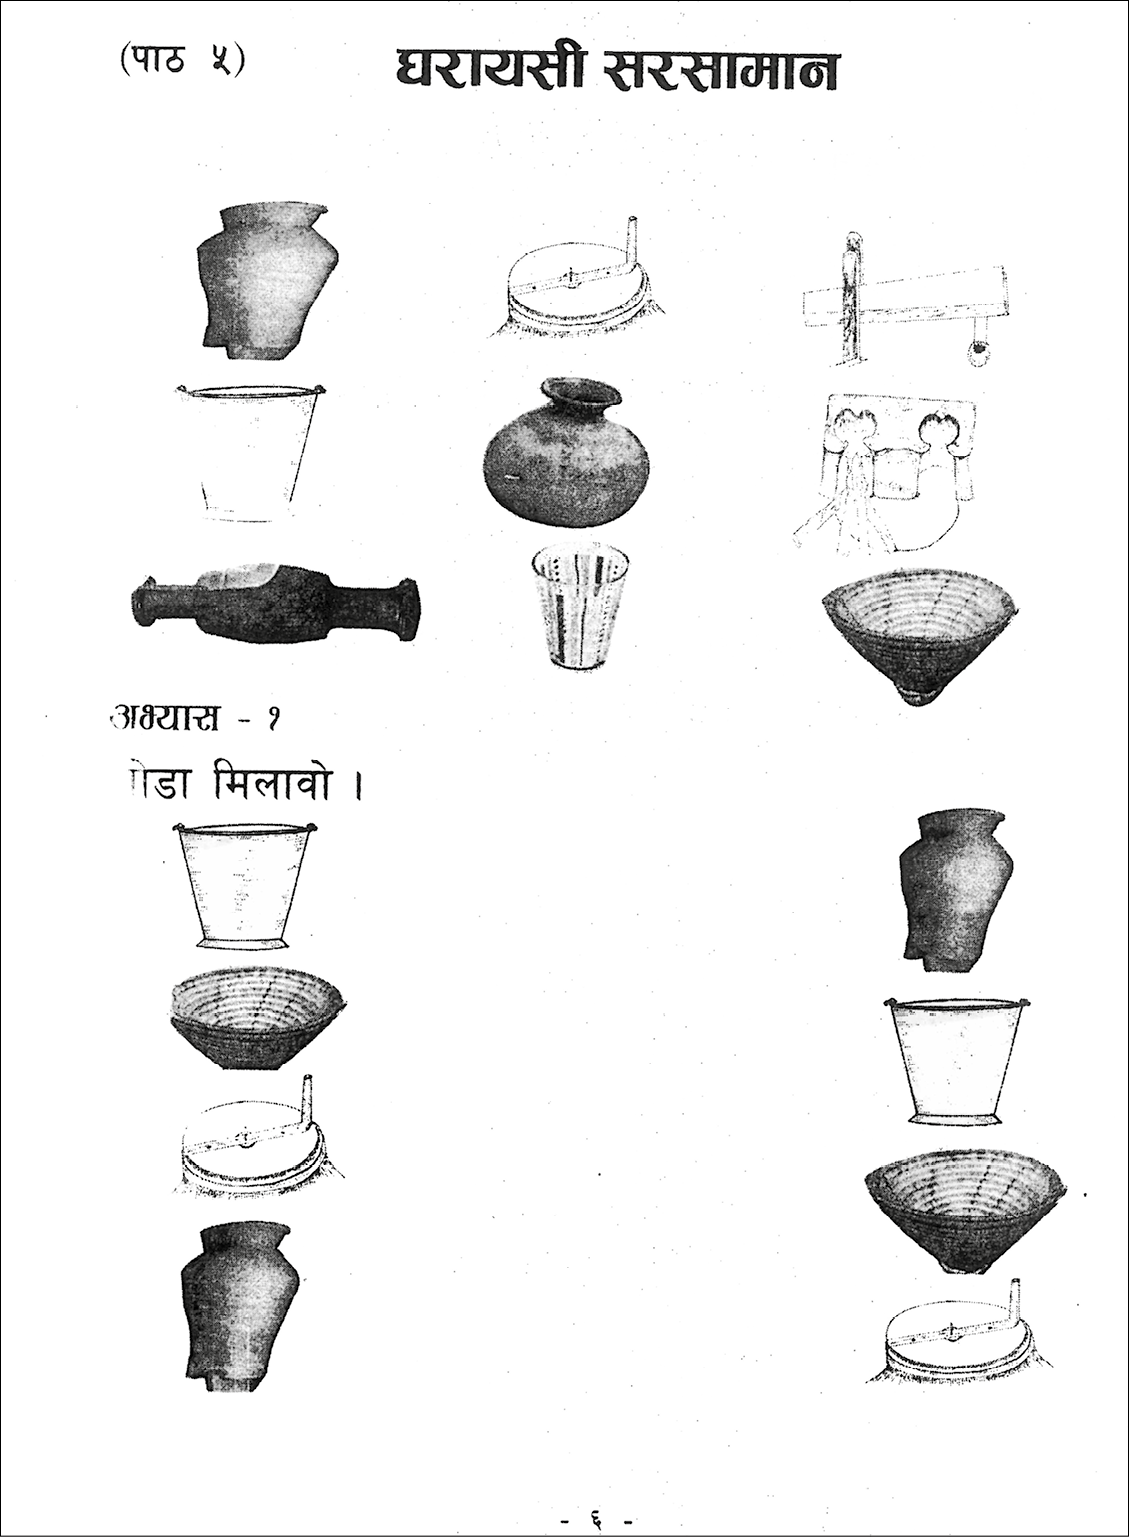 Fig. 3.4.  Class 2 Awadhi textbook, lesson 3, page 68. Photograph supplied by the author with the consent of the textbook publishers, CC BY.